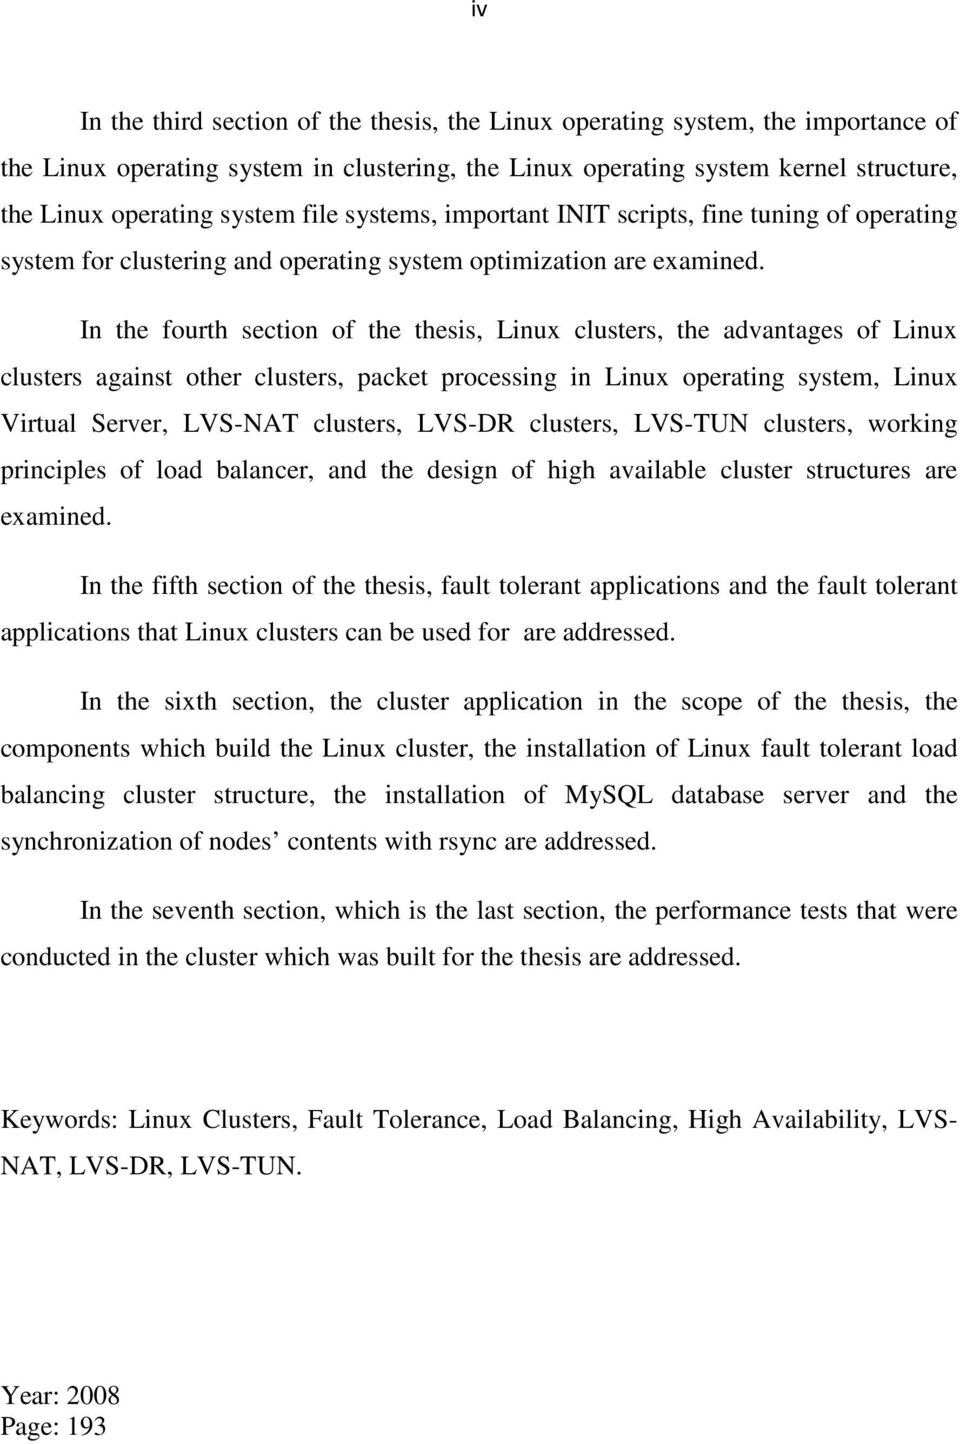 In the fourth section of the thesis, Linux clusters, the advantages of Linux clusters against other clusters, packet processing in Linux operating system, Linux Virtual Server, LVS-NAT clusters,